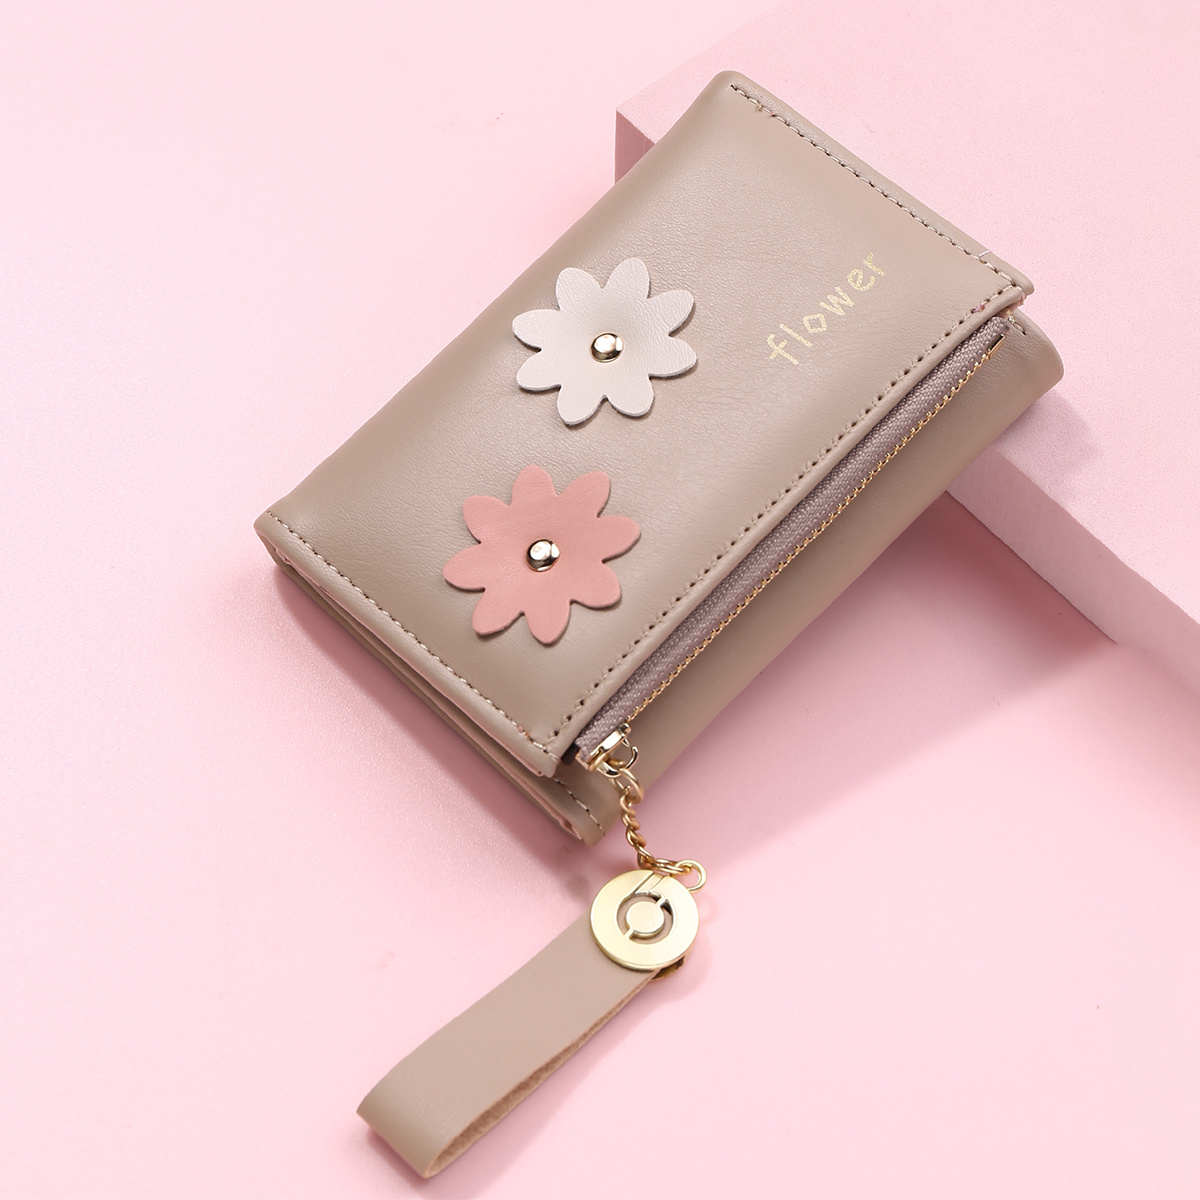 flower compact wallet